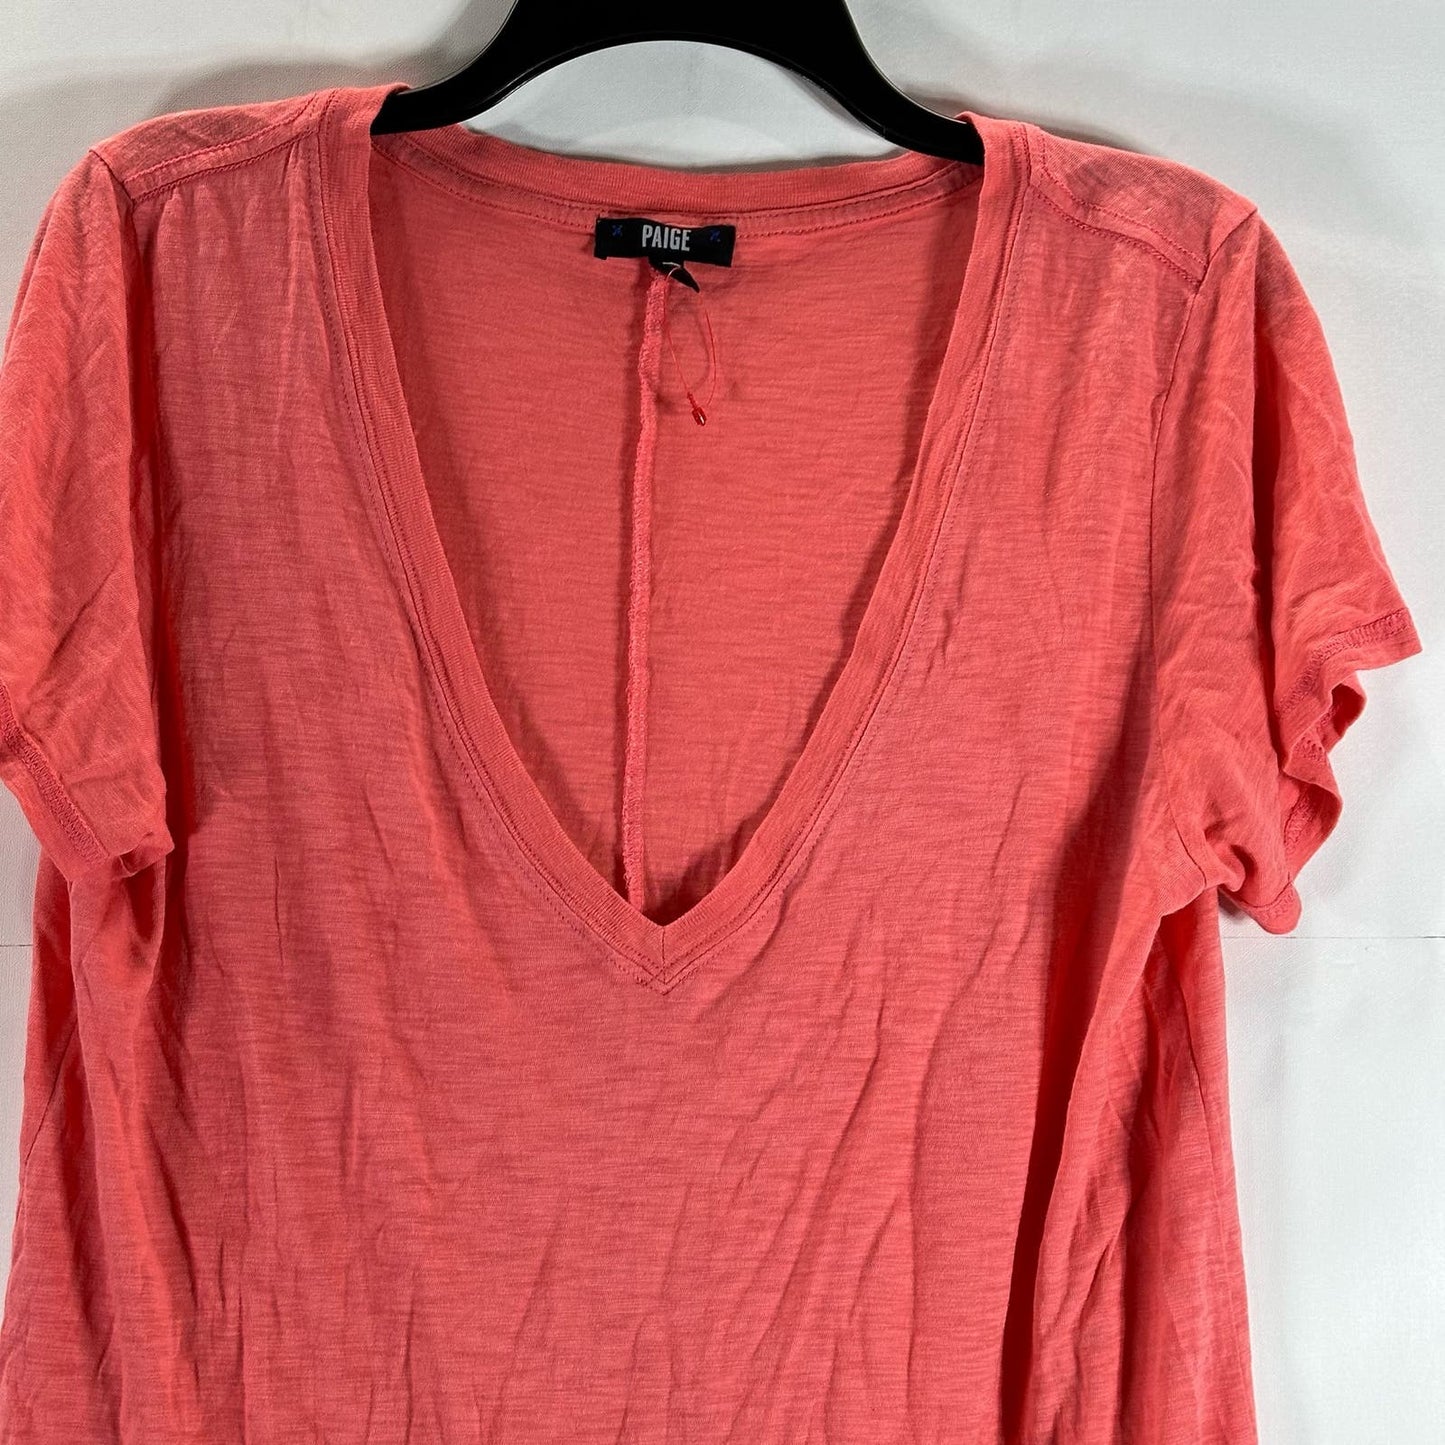 PAIGE Women's Pink Deep V-Neck Casual Short Sleeve Top SZ S